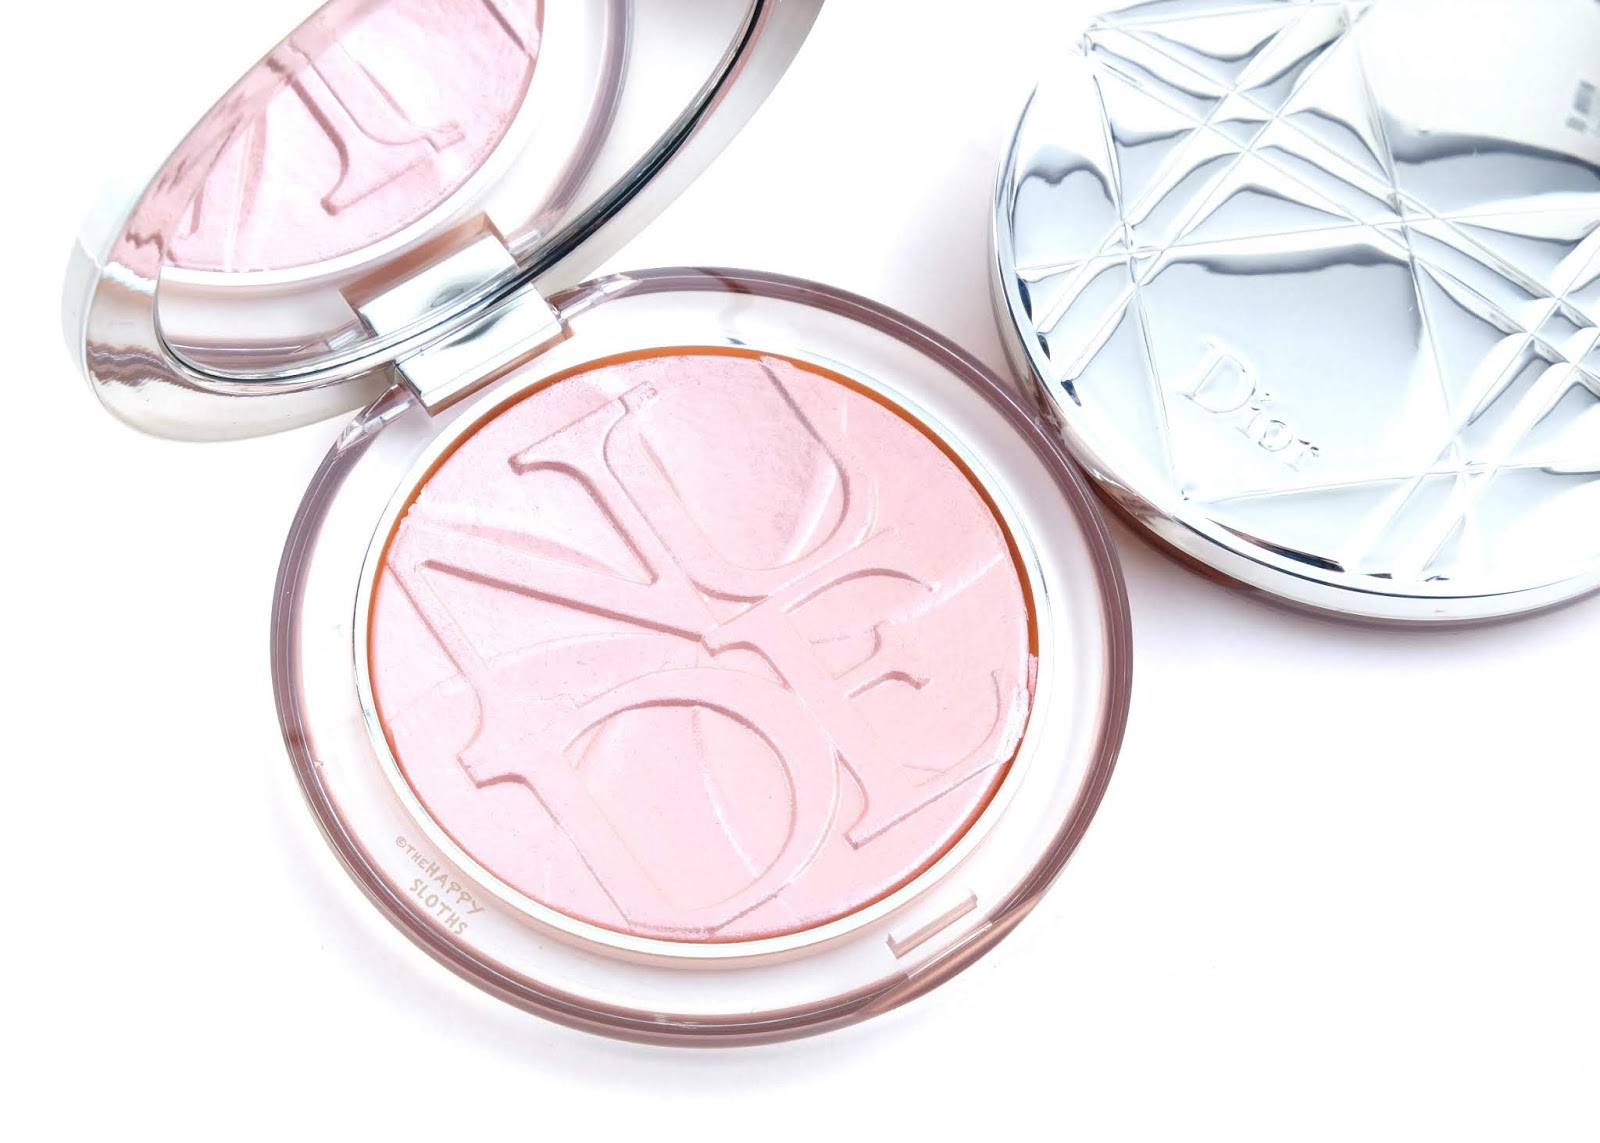 Dior | Spring 2019 Collection | DiorSkin Nude Luminizer Lolli'Glow in "08 Pink Delight": Review and Swatches